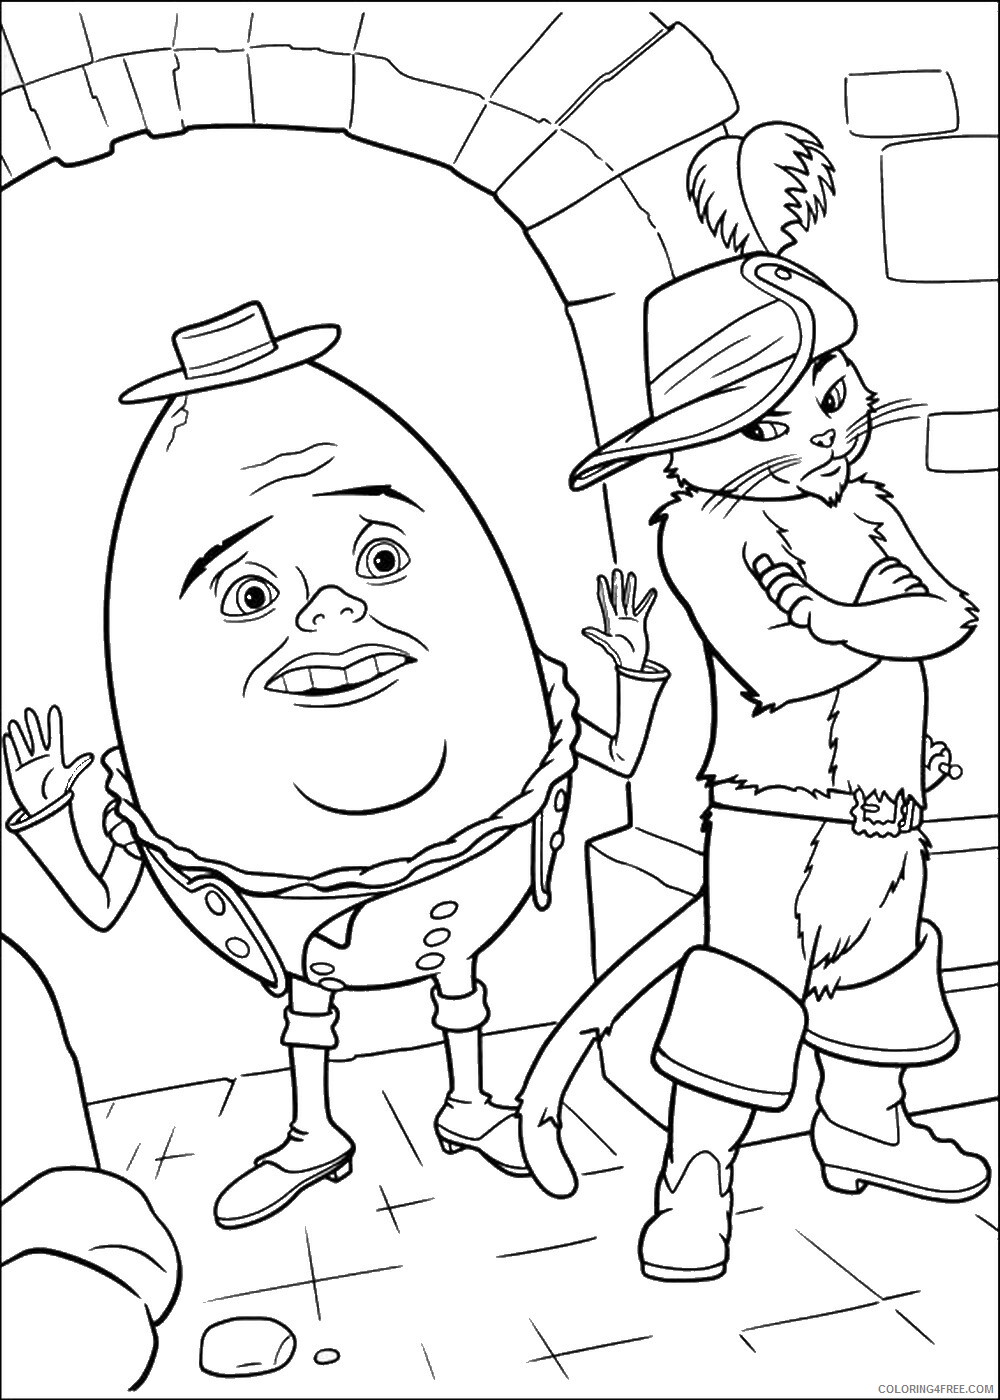 Puss in Boots Coloring Pages TV Film puss_boots_cl_15 Printable 2020 06924 Coloring4free